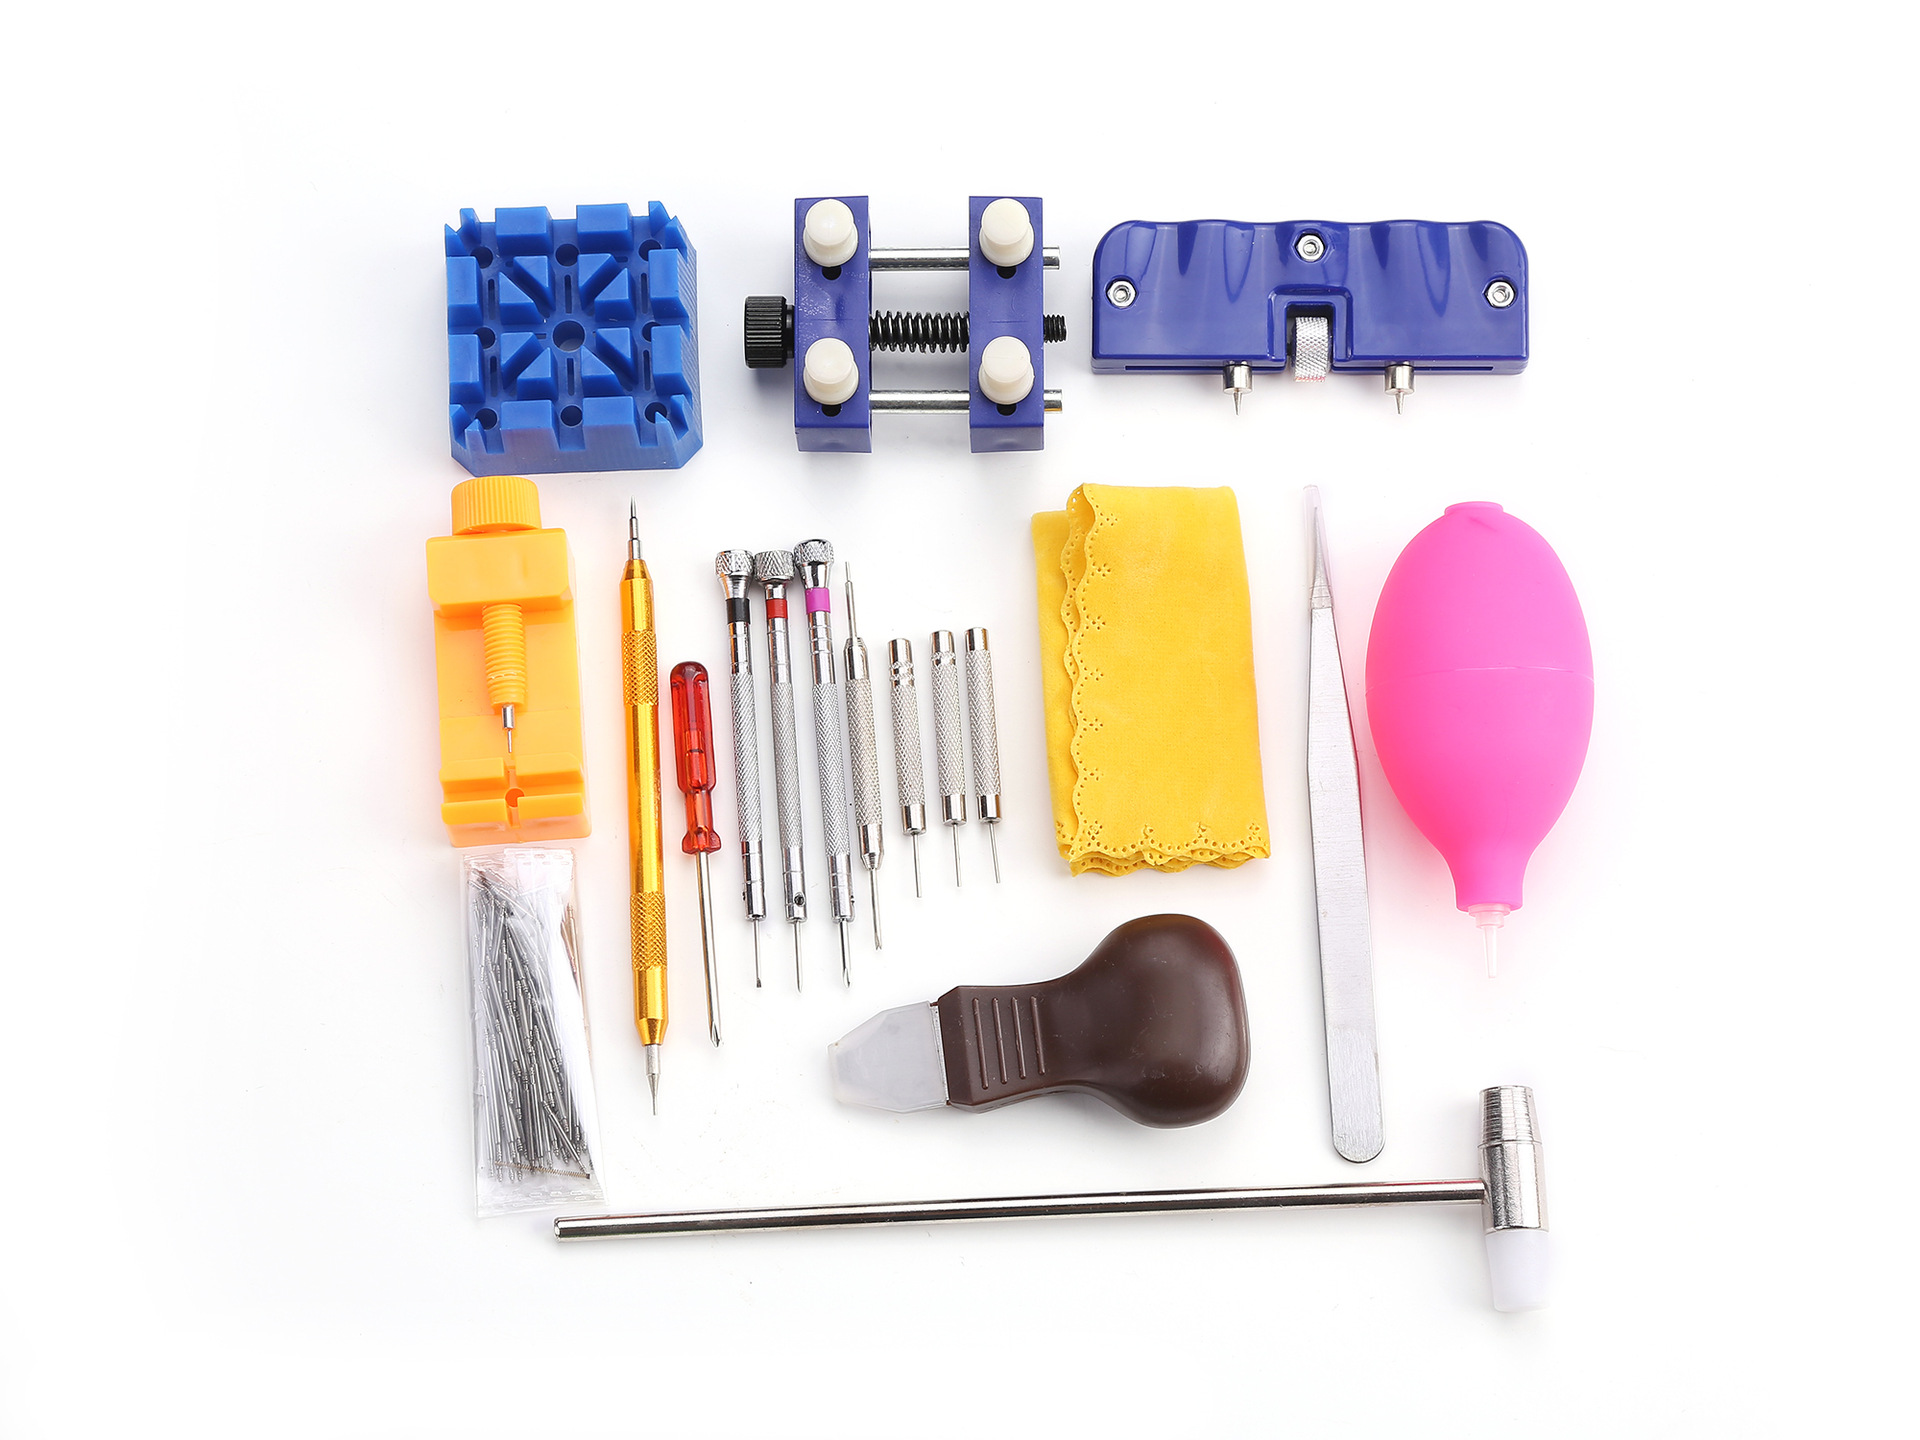 126pcs-Professional-Watch-Repair-Tool-Kits-Back-Case-Opener-Spring-Pins-Screwdriver-with-Carry-Bag-1282170